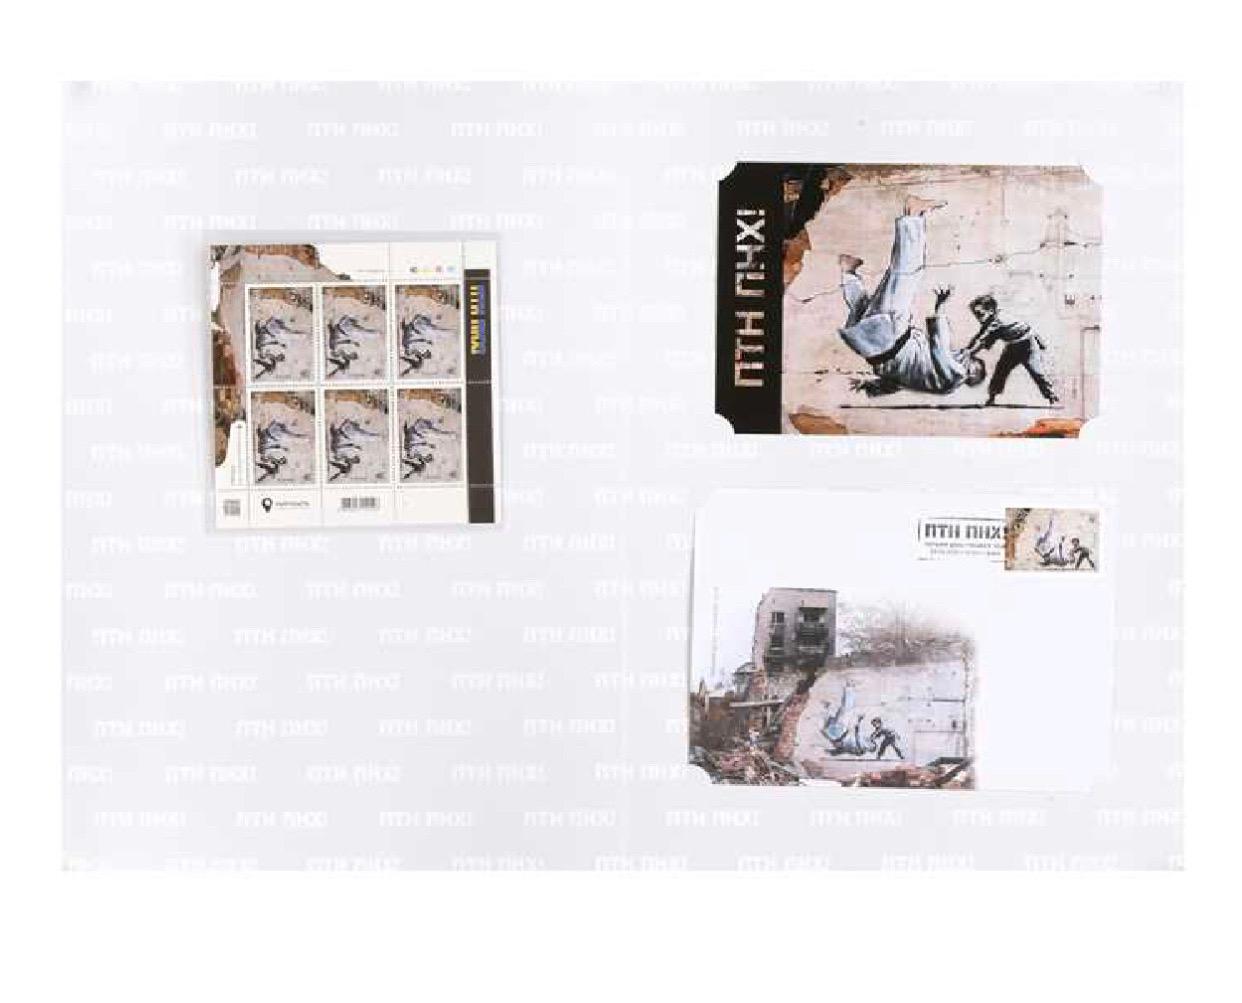 BANKSY 
Ukraine booklet
2023

booklet with postcard, envelope and stamps
from the unnumbered edition of 1500
overall 30.6 x 21.7cm
unframed